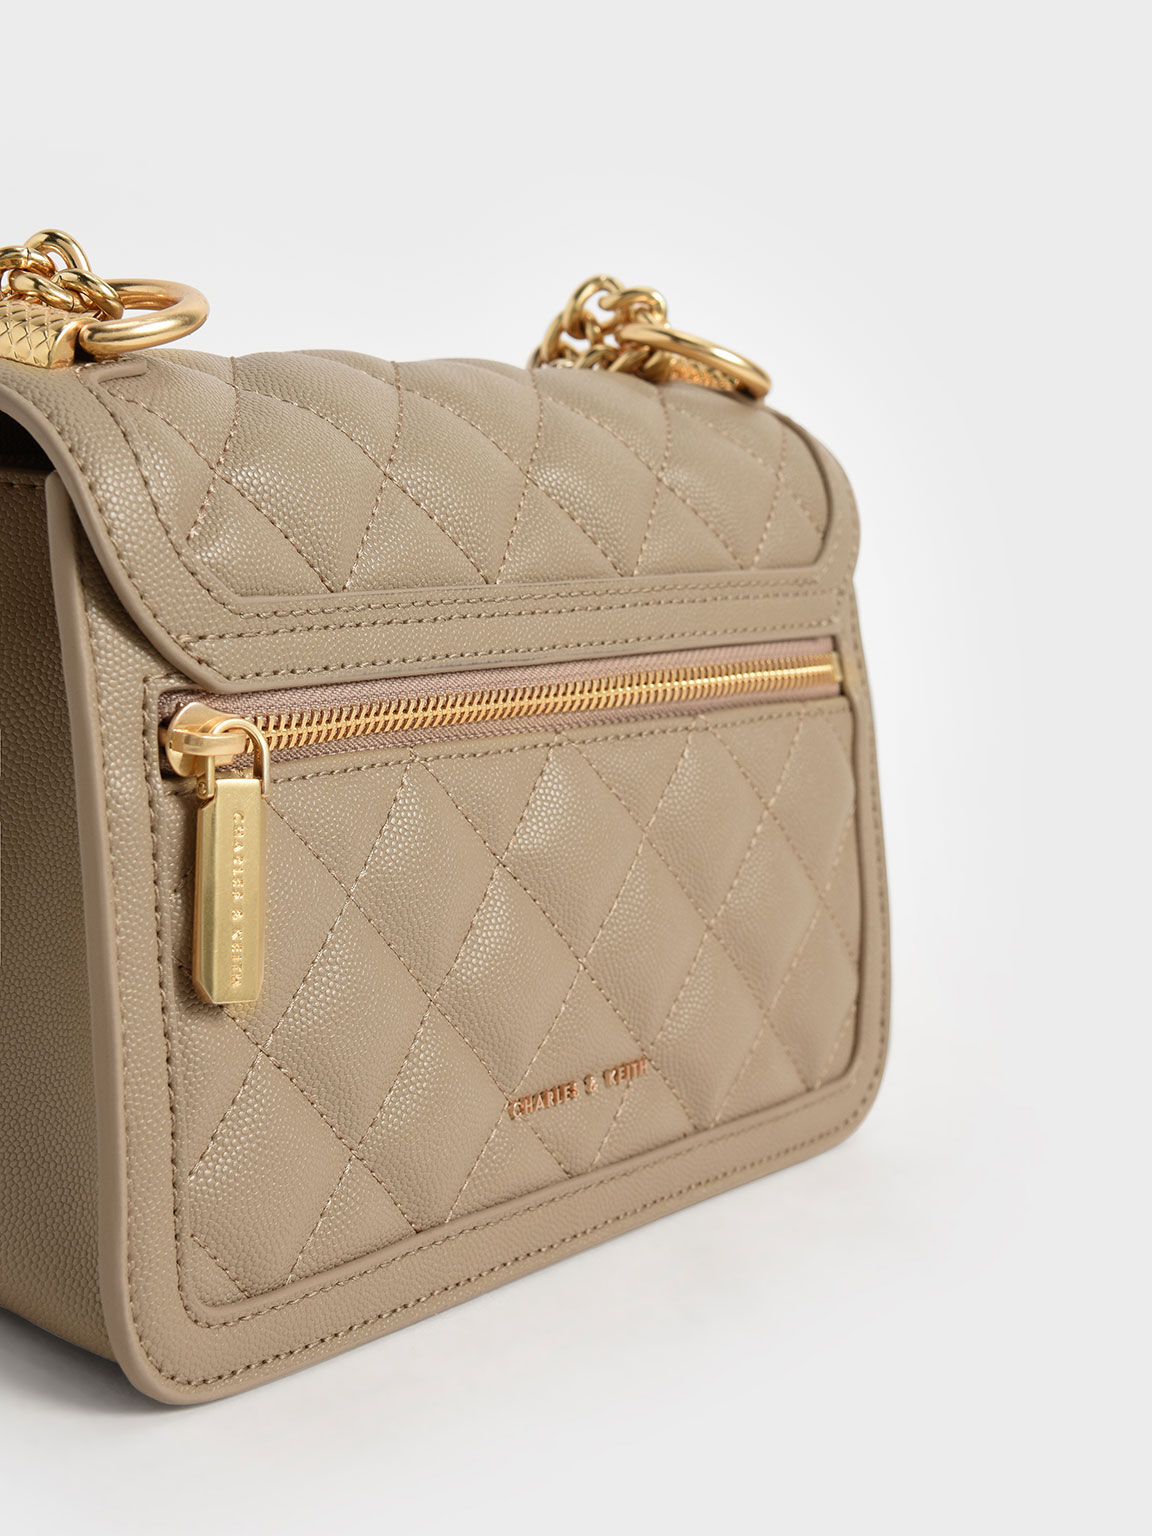 TÚI CHARLES KEITH MICAELA QUILTED CHAIN BAG 8